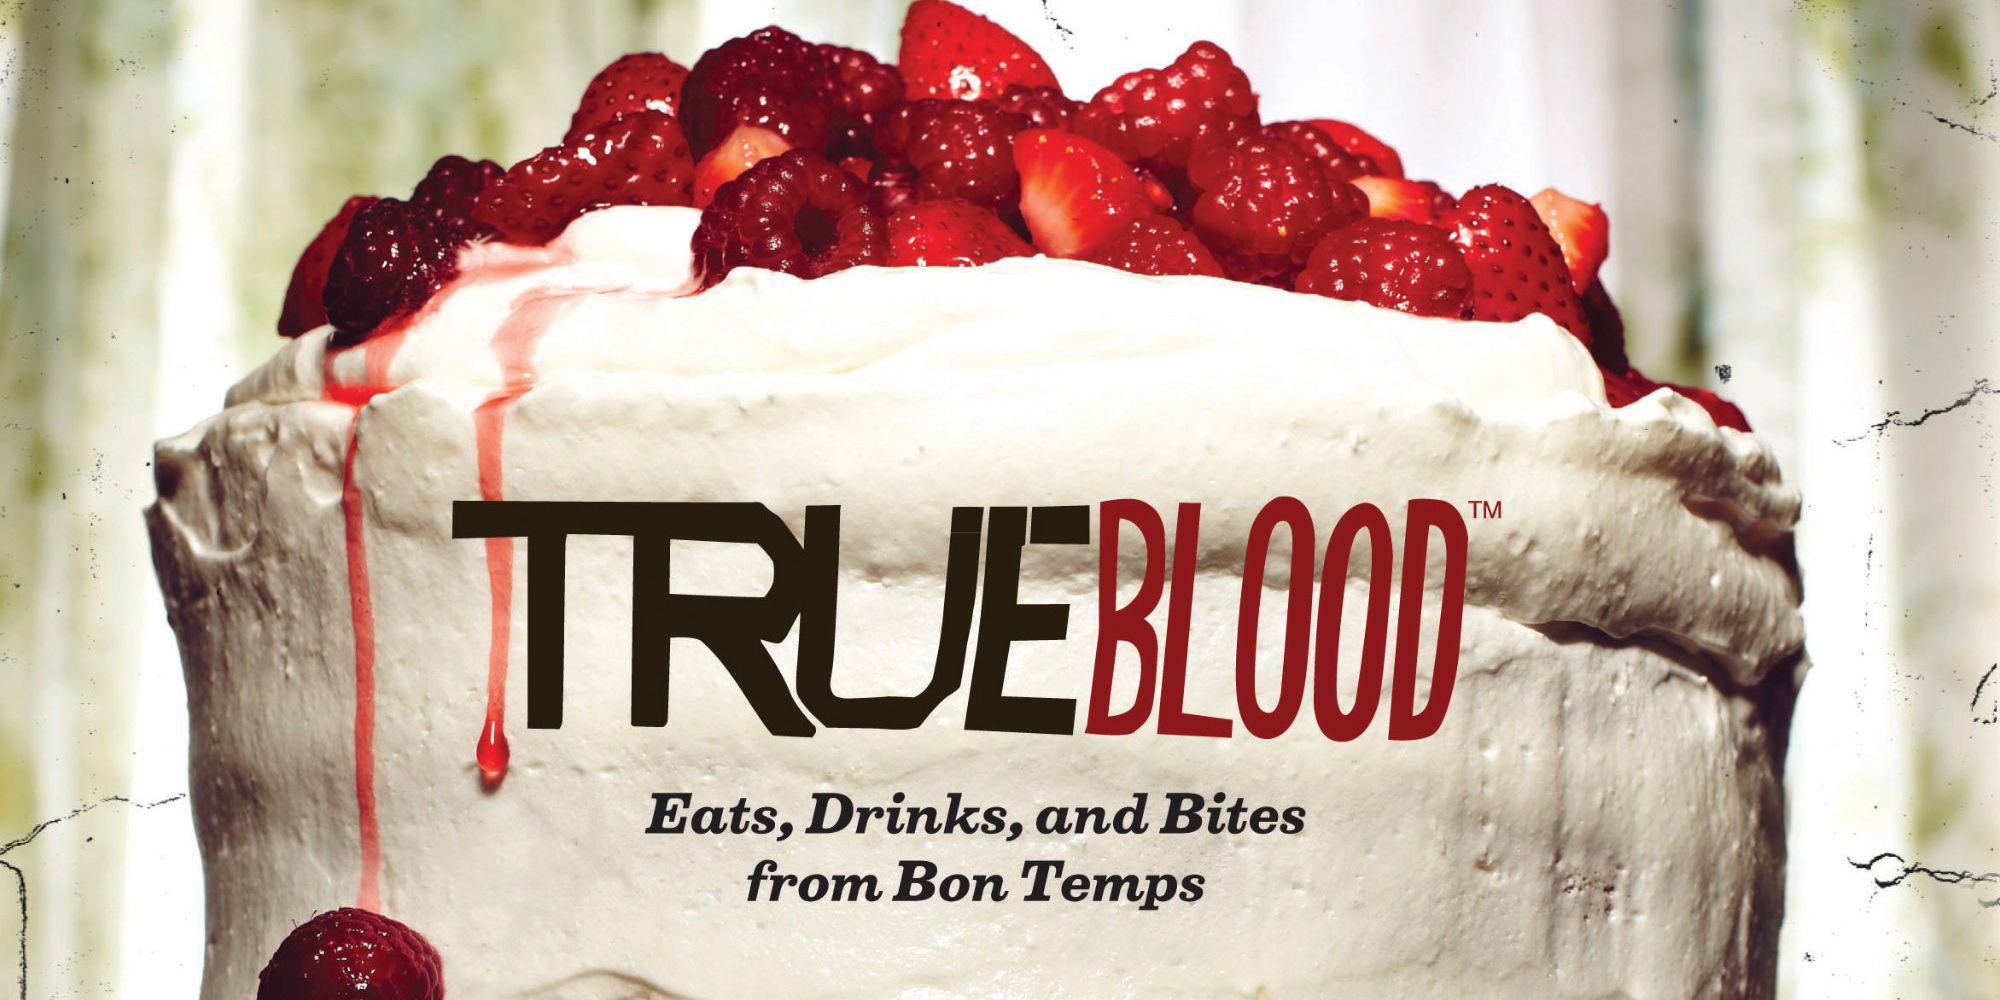 15 BehindTheScenes Secrets You Didn’t Know About True Blood